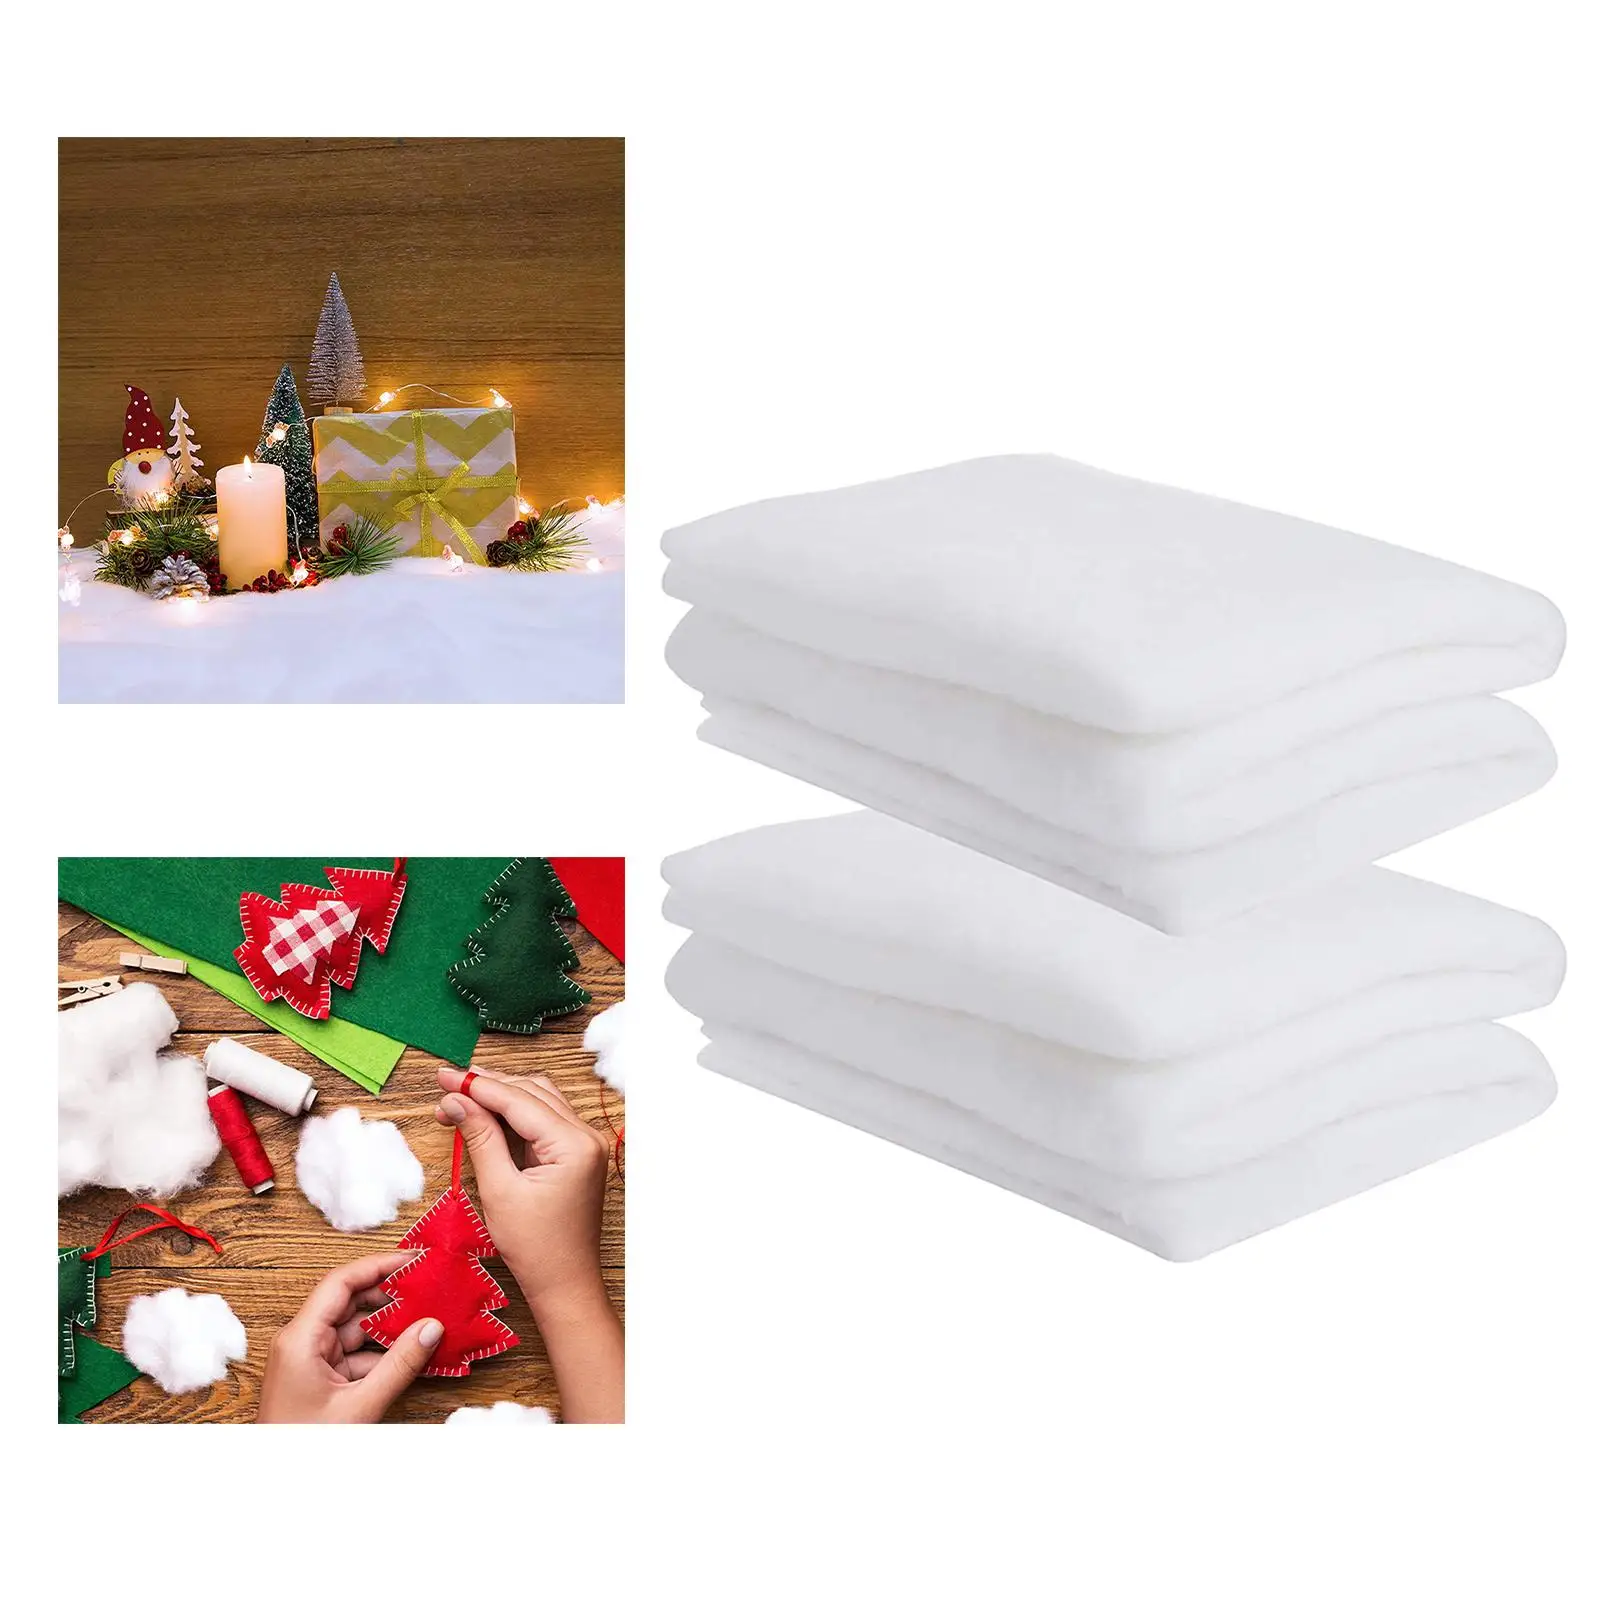 2 Pieces Artificial Snow Blanket Village Decorations Christmas Snow Blanket Roll for Christmas Displays Christmas Party